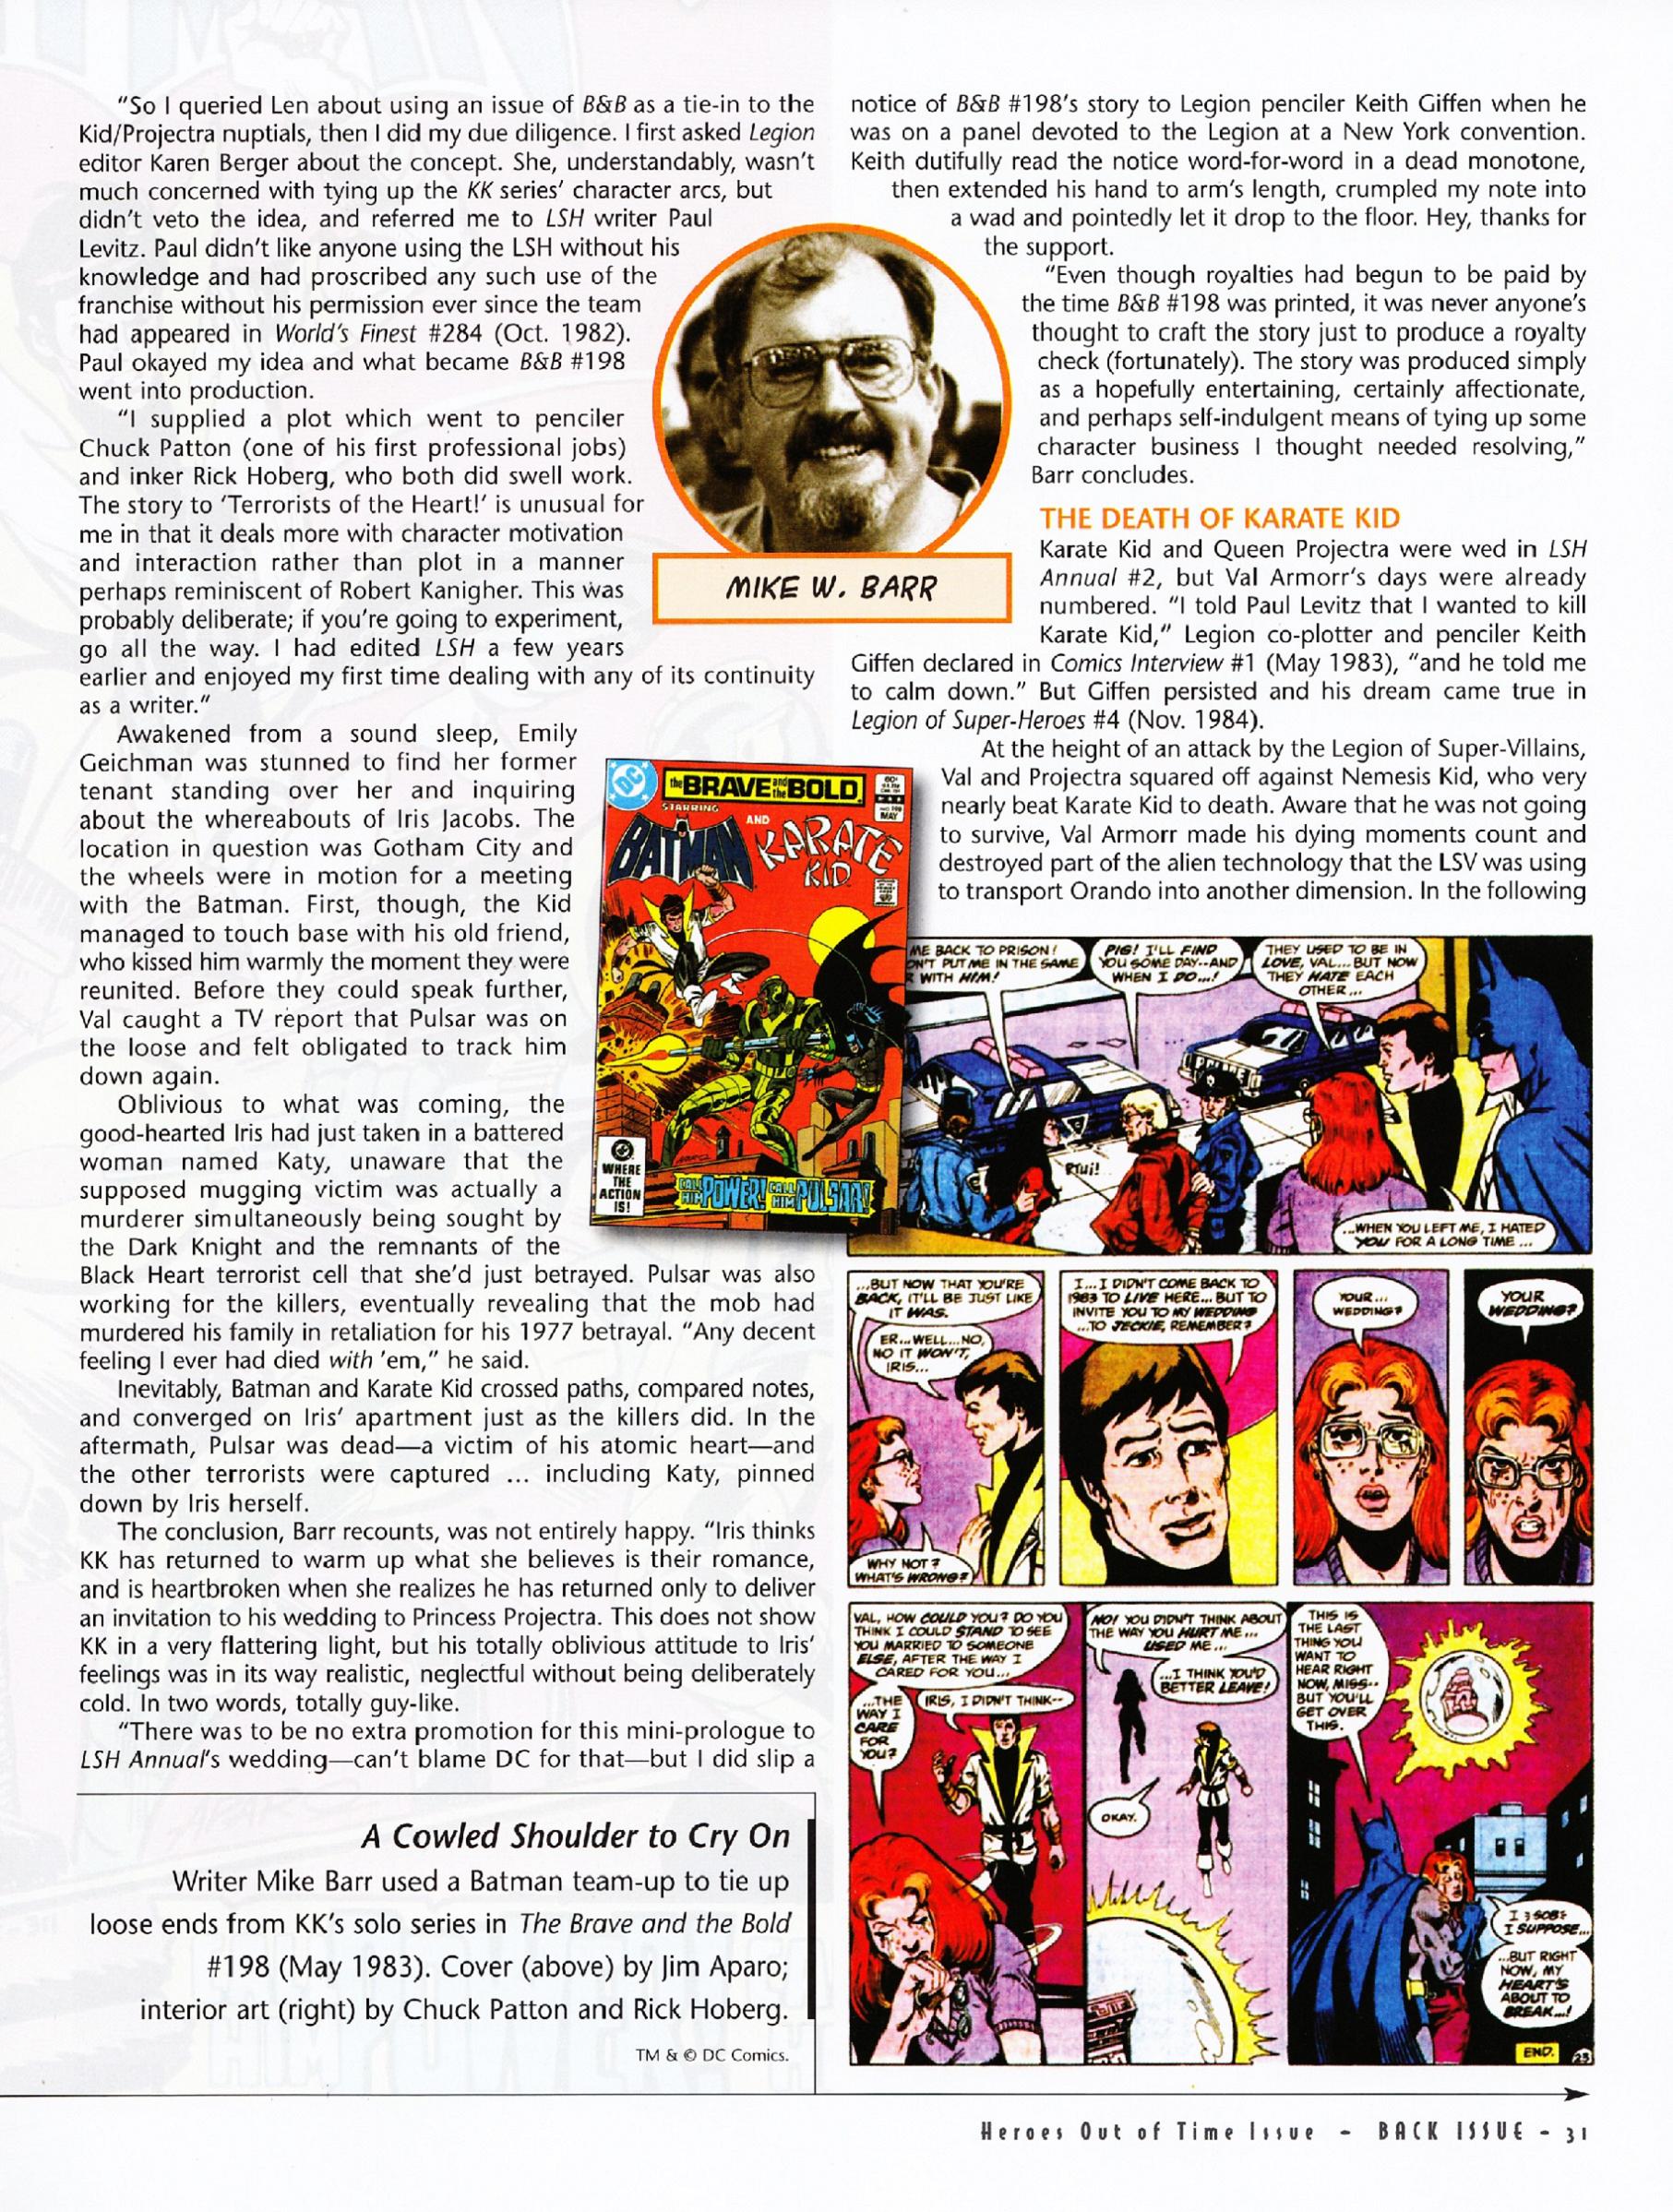 Read online Back Issue comic -  Issue #67 - 33